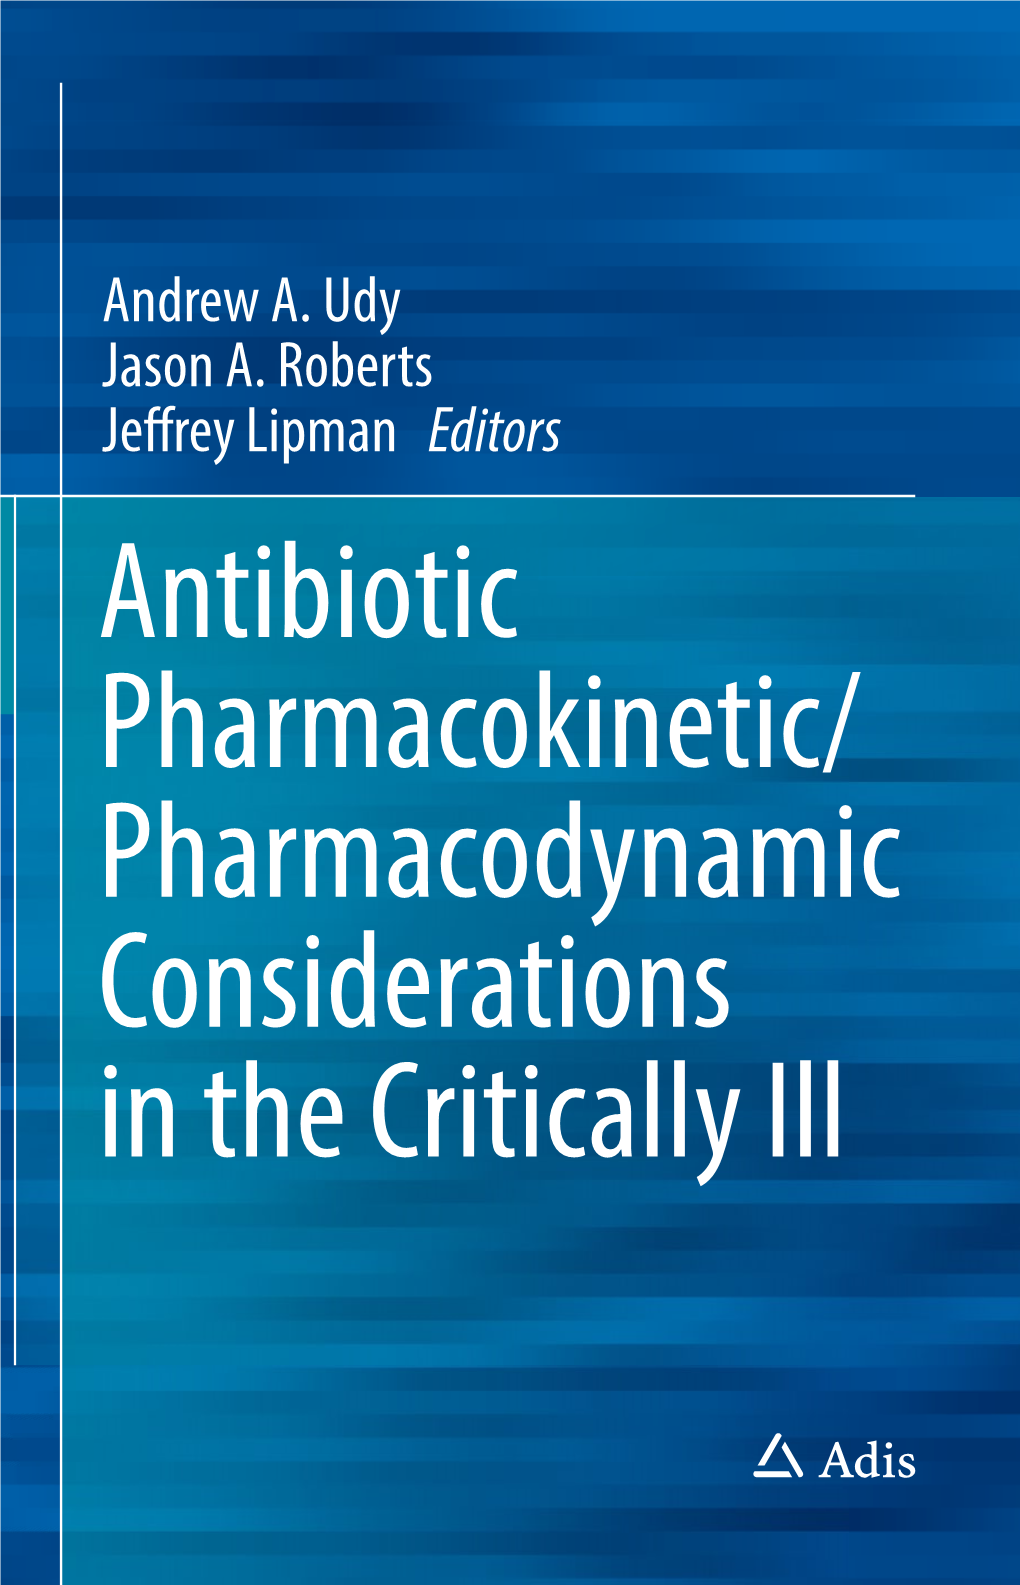 Pharmacodynamic Considerations in the Critically Ill Antibiotic Pharmacokinetic/Pharmacodynamic Considerations in the Critically Ill